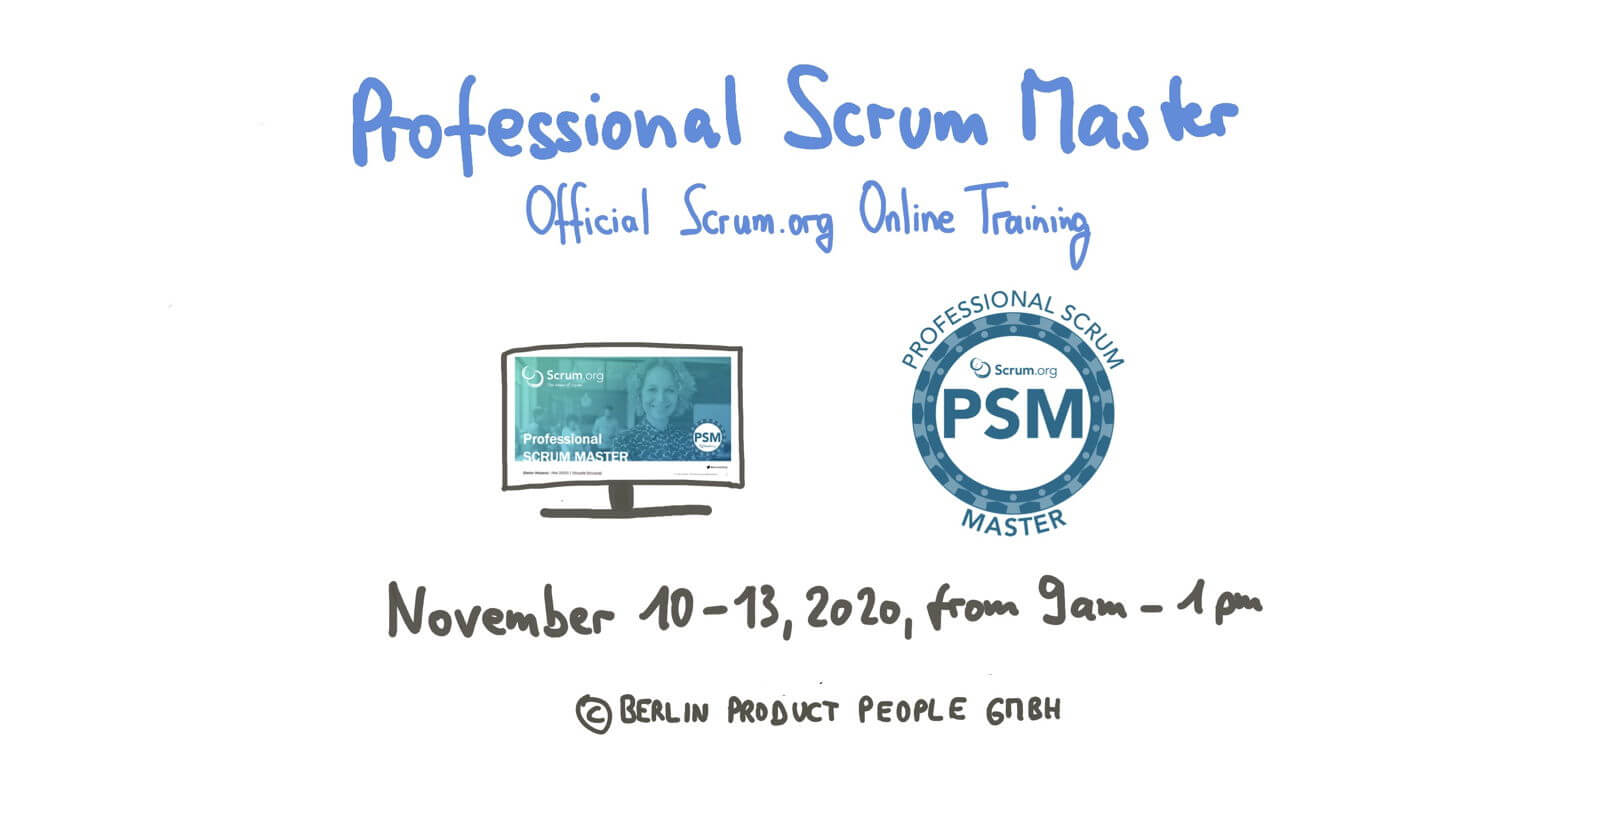 🖥 Professional Scrum Master Online Training: November 10-13, 2020 — Berlin Product People GmbH